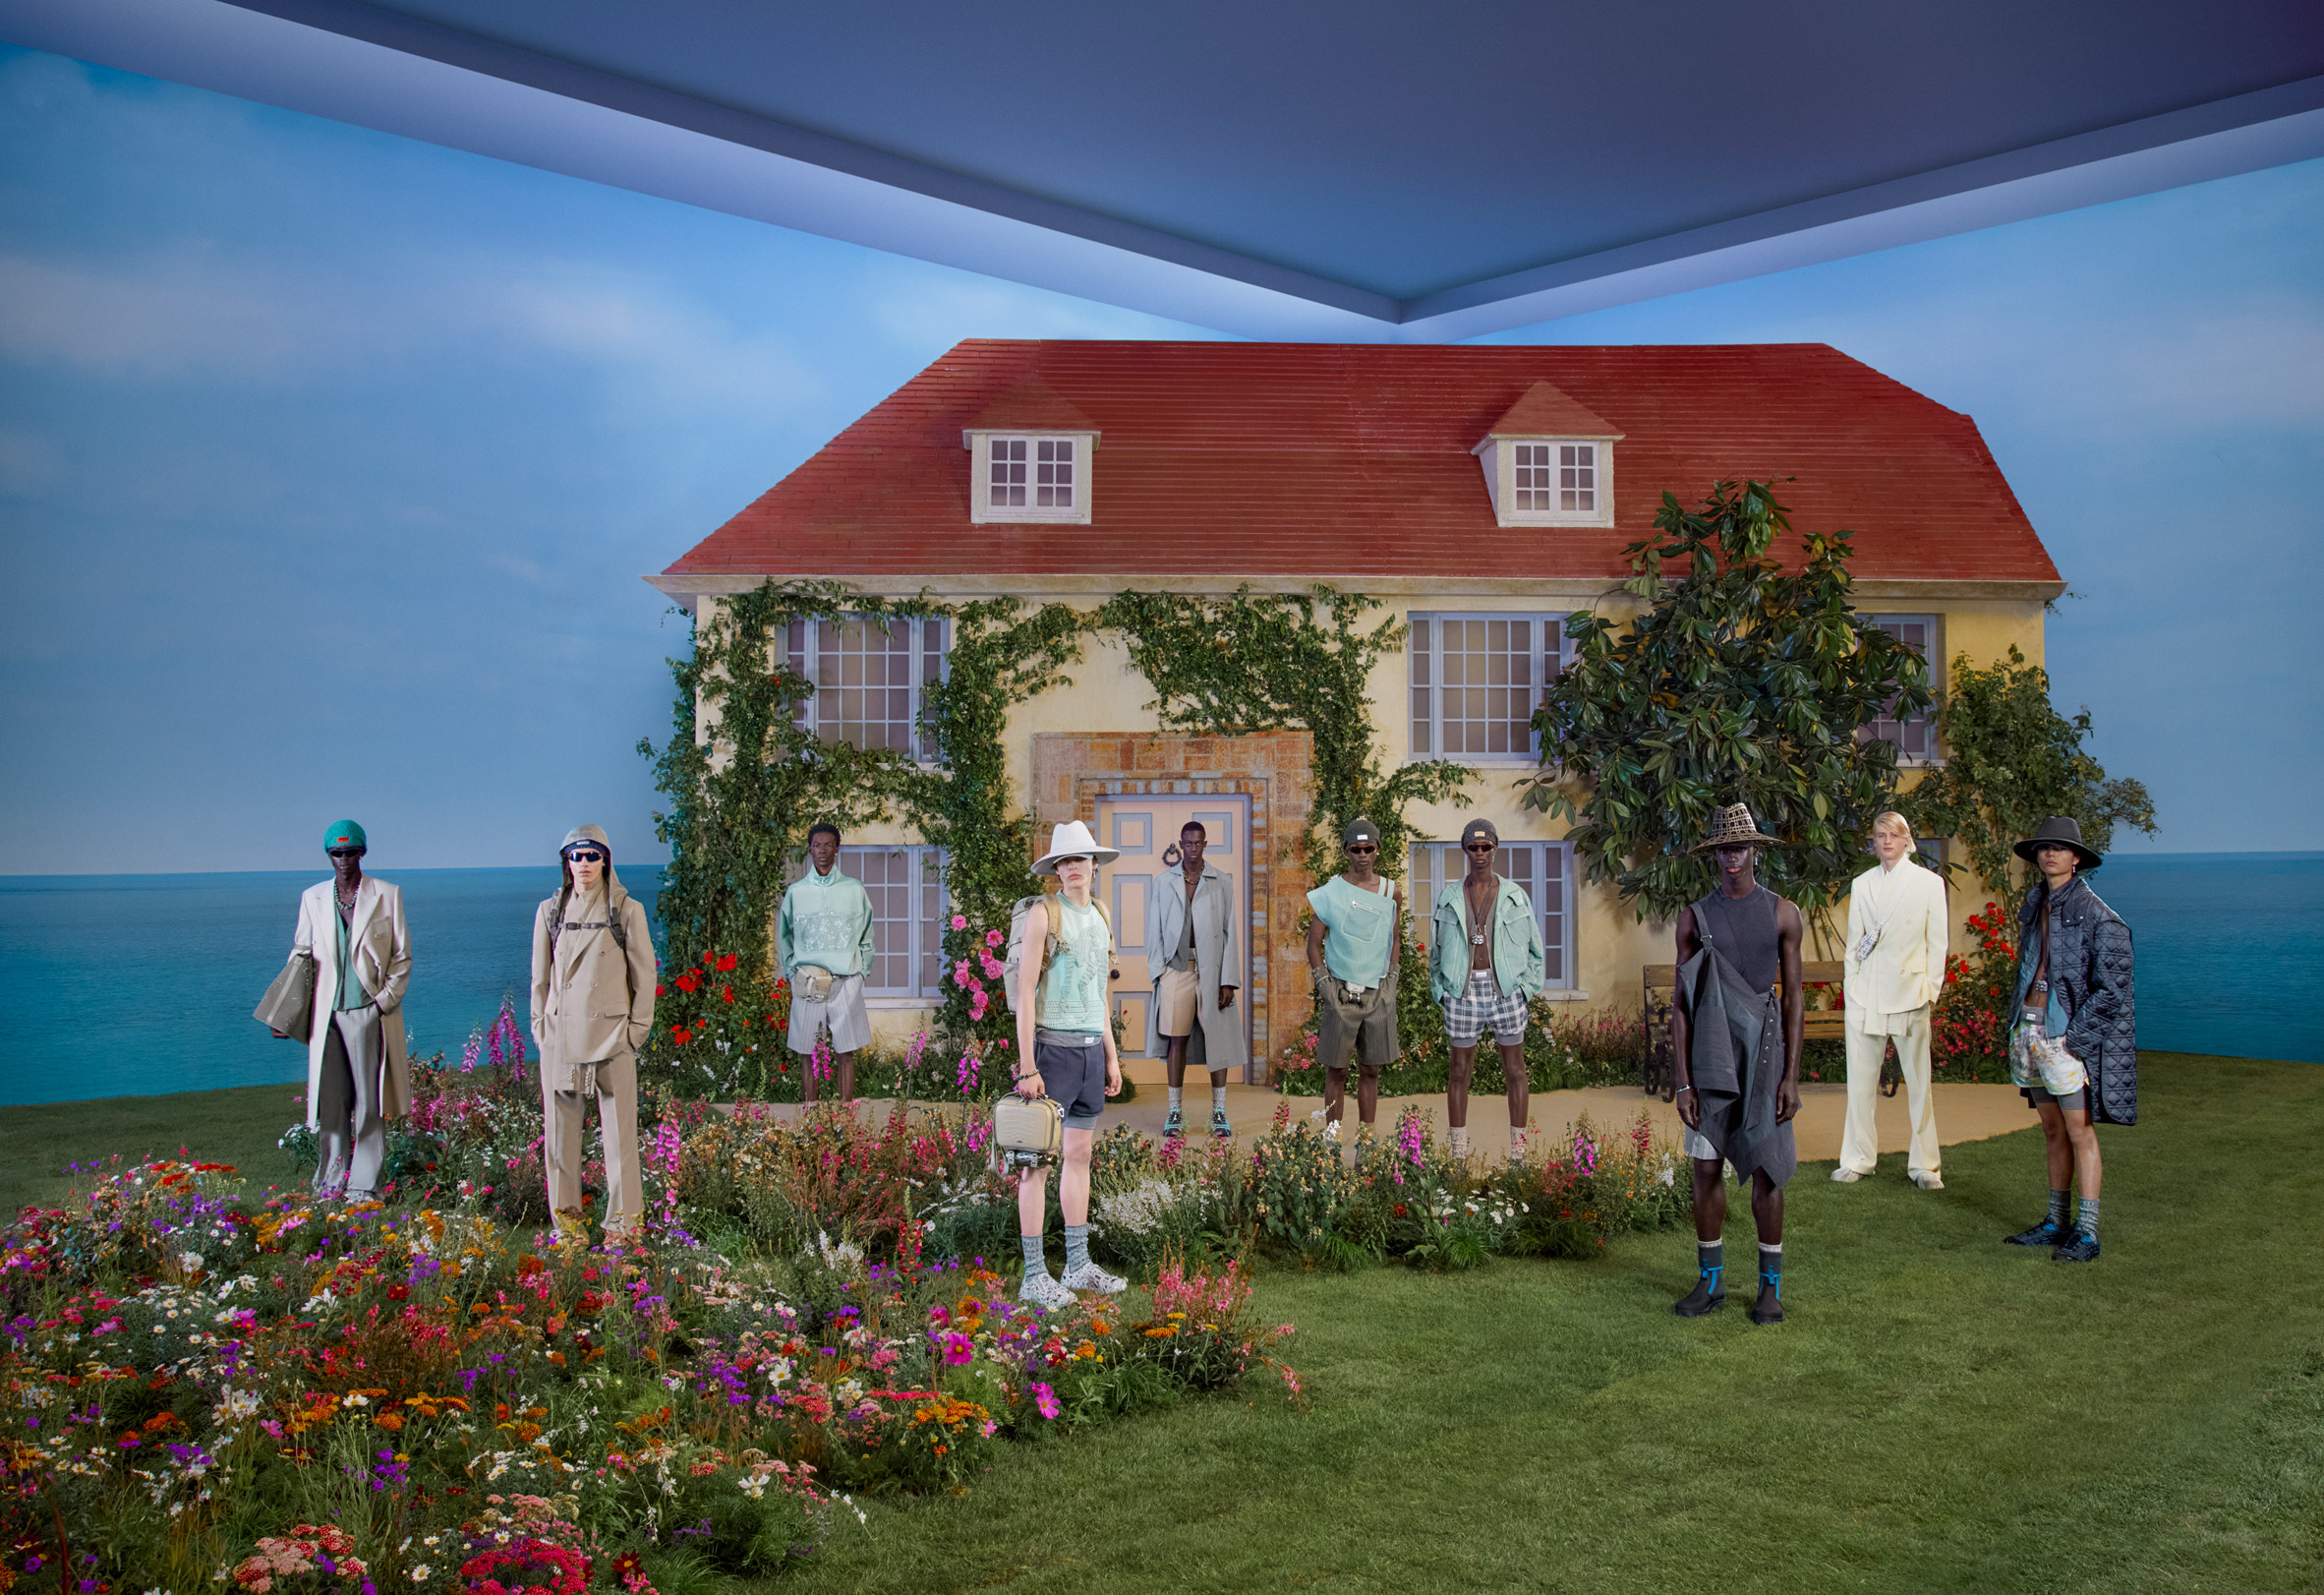 The design set is designed according to the theme of the Spring-Summer 2023 menswear collection from Dior